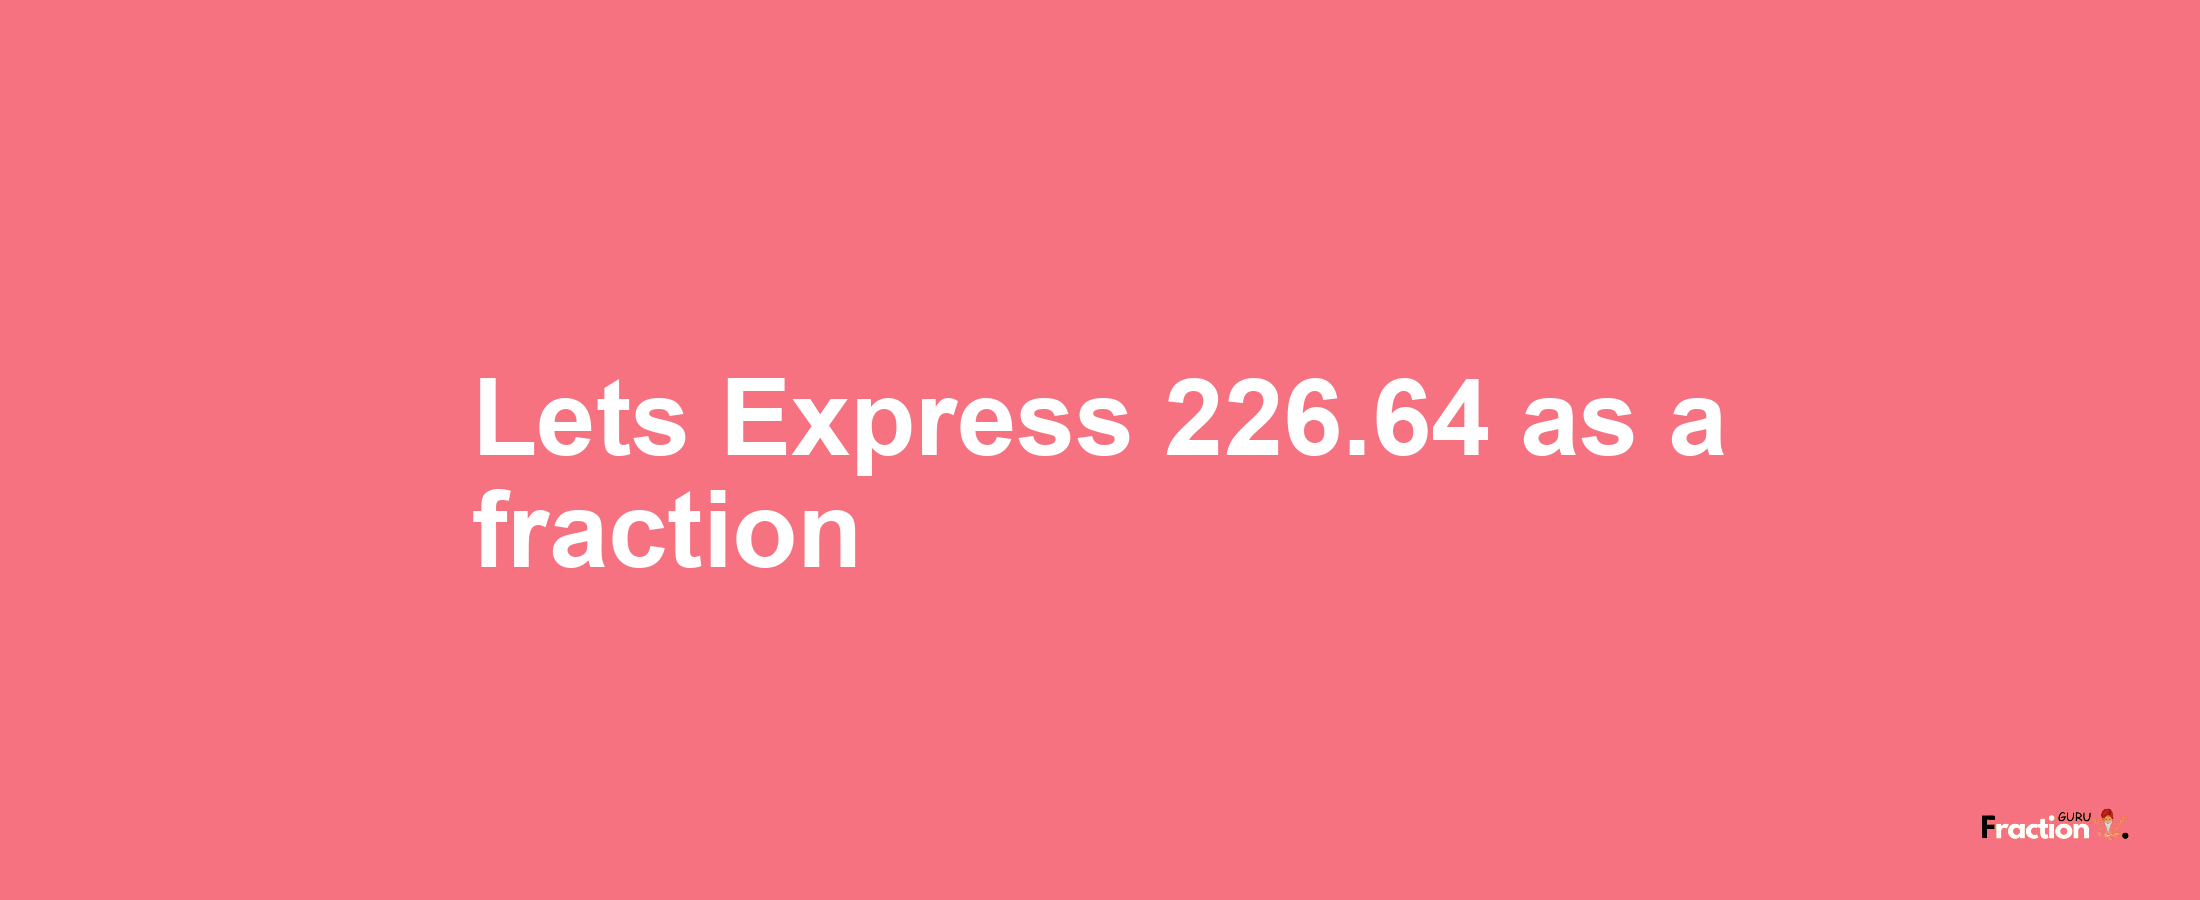 Lets Express 226.64 as afraction